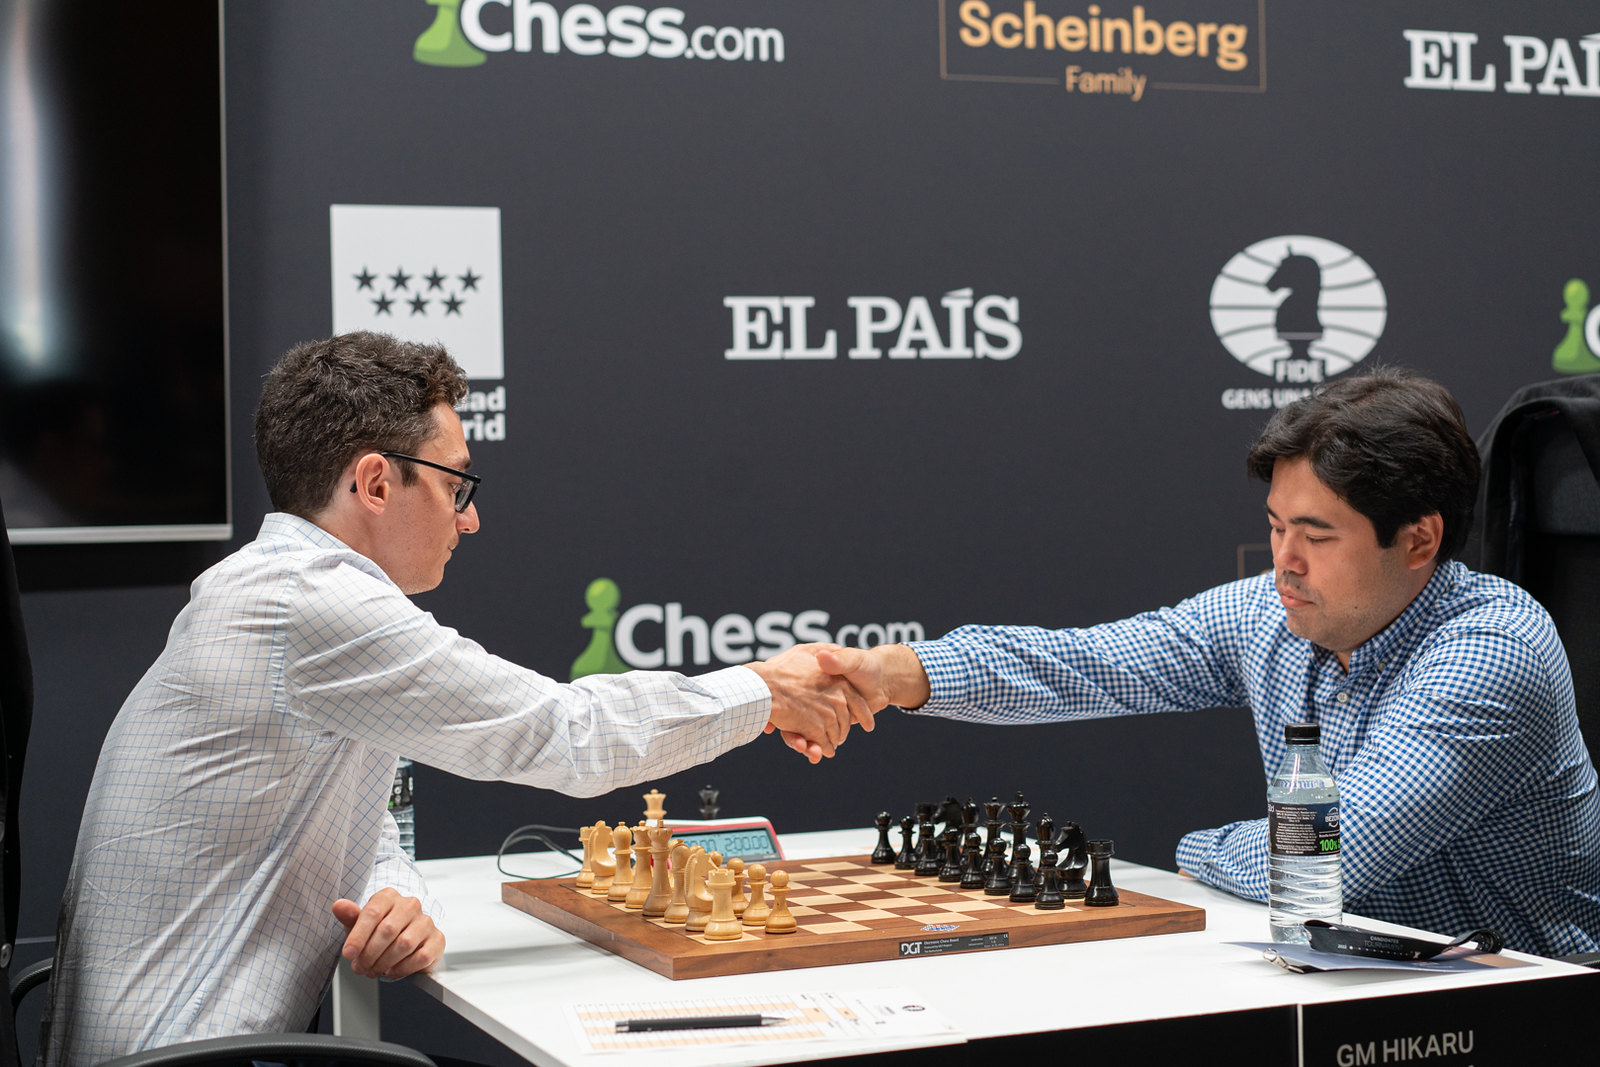 2022 Candidates Round 1: A confident start for Nepomniachtchi and Caruana